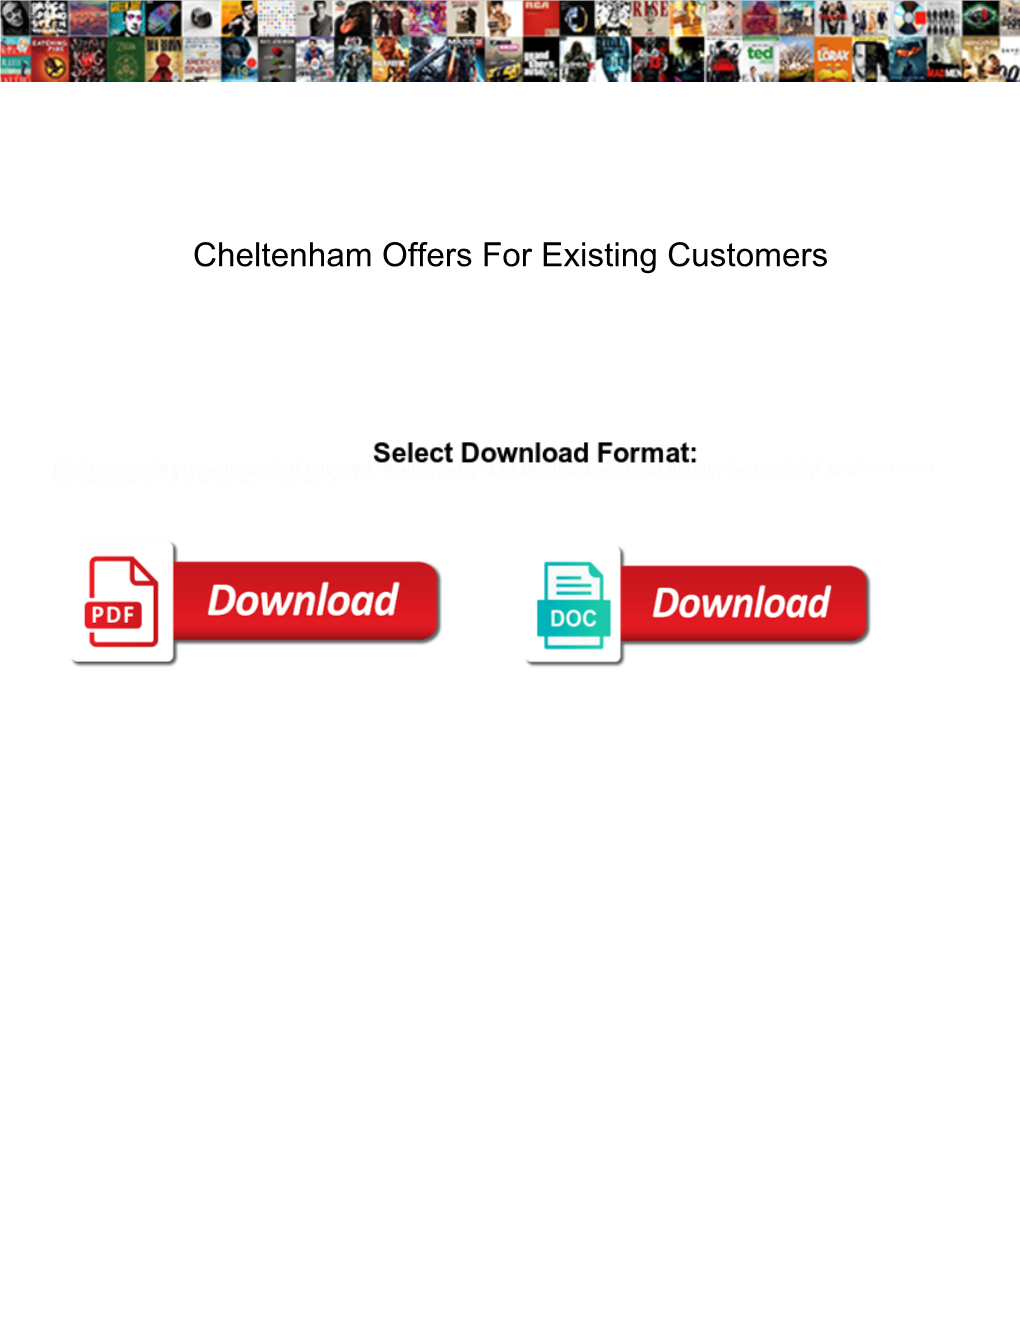 Cheltenham Offers for Existing Customers